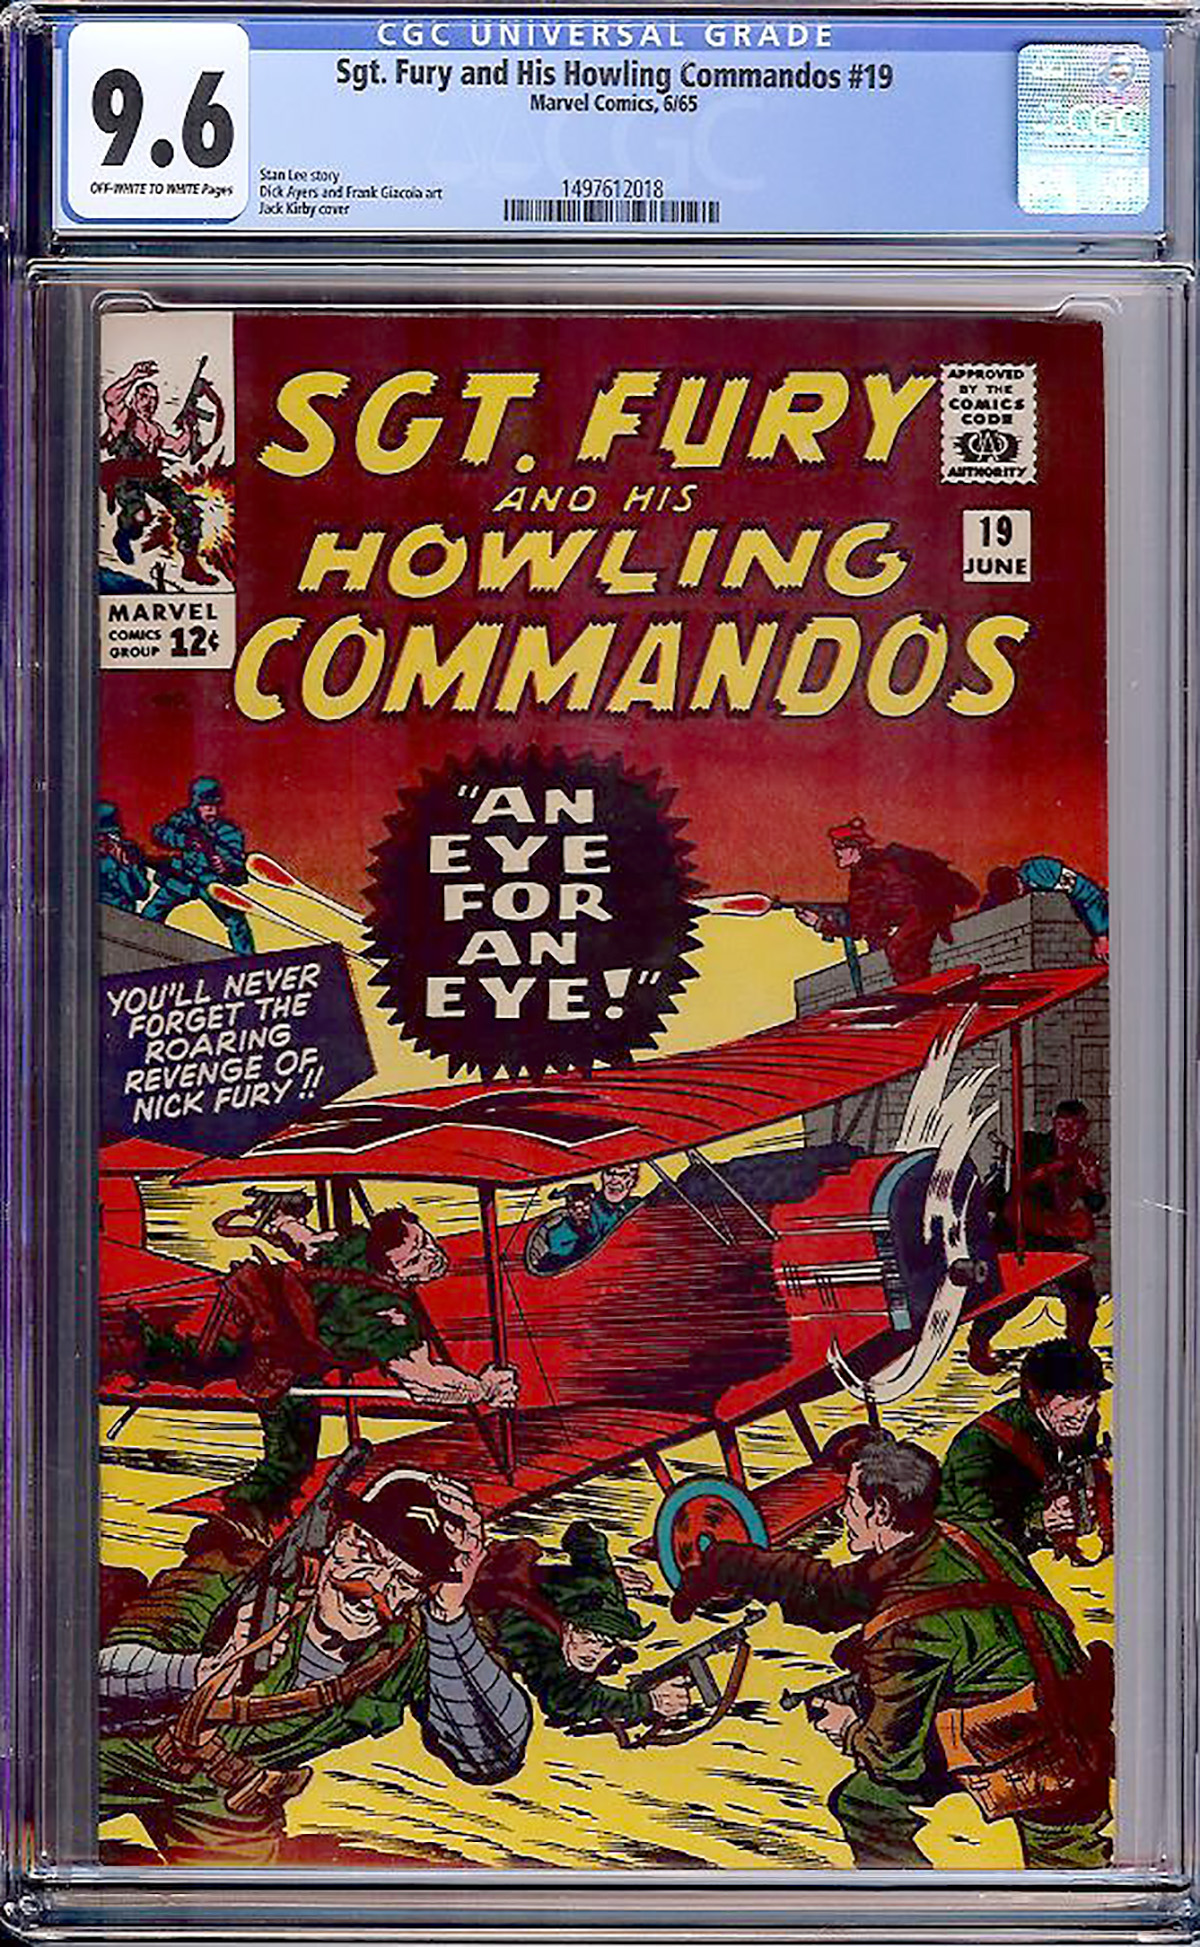 Sgt. Fury and His Howling Commandos #19 CGC 9.6 ow/w